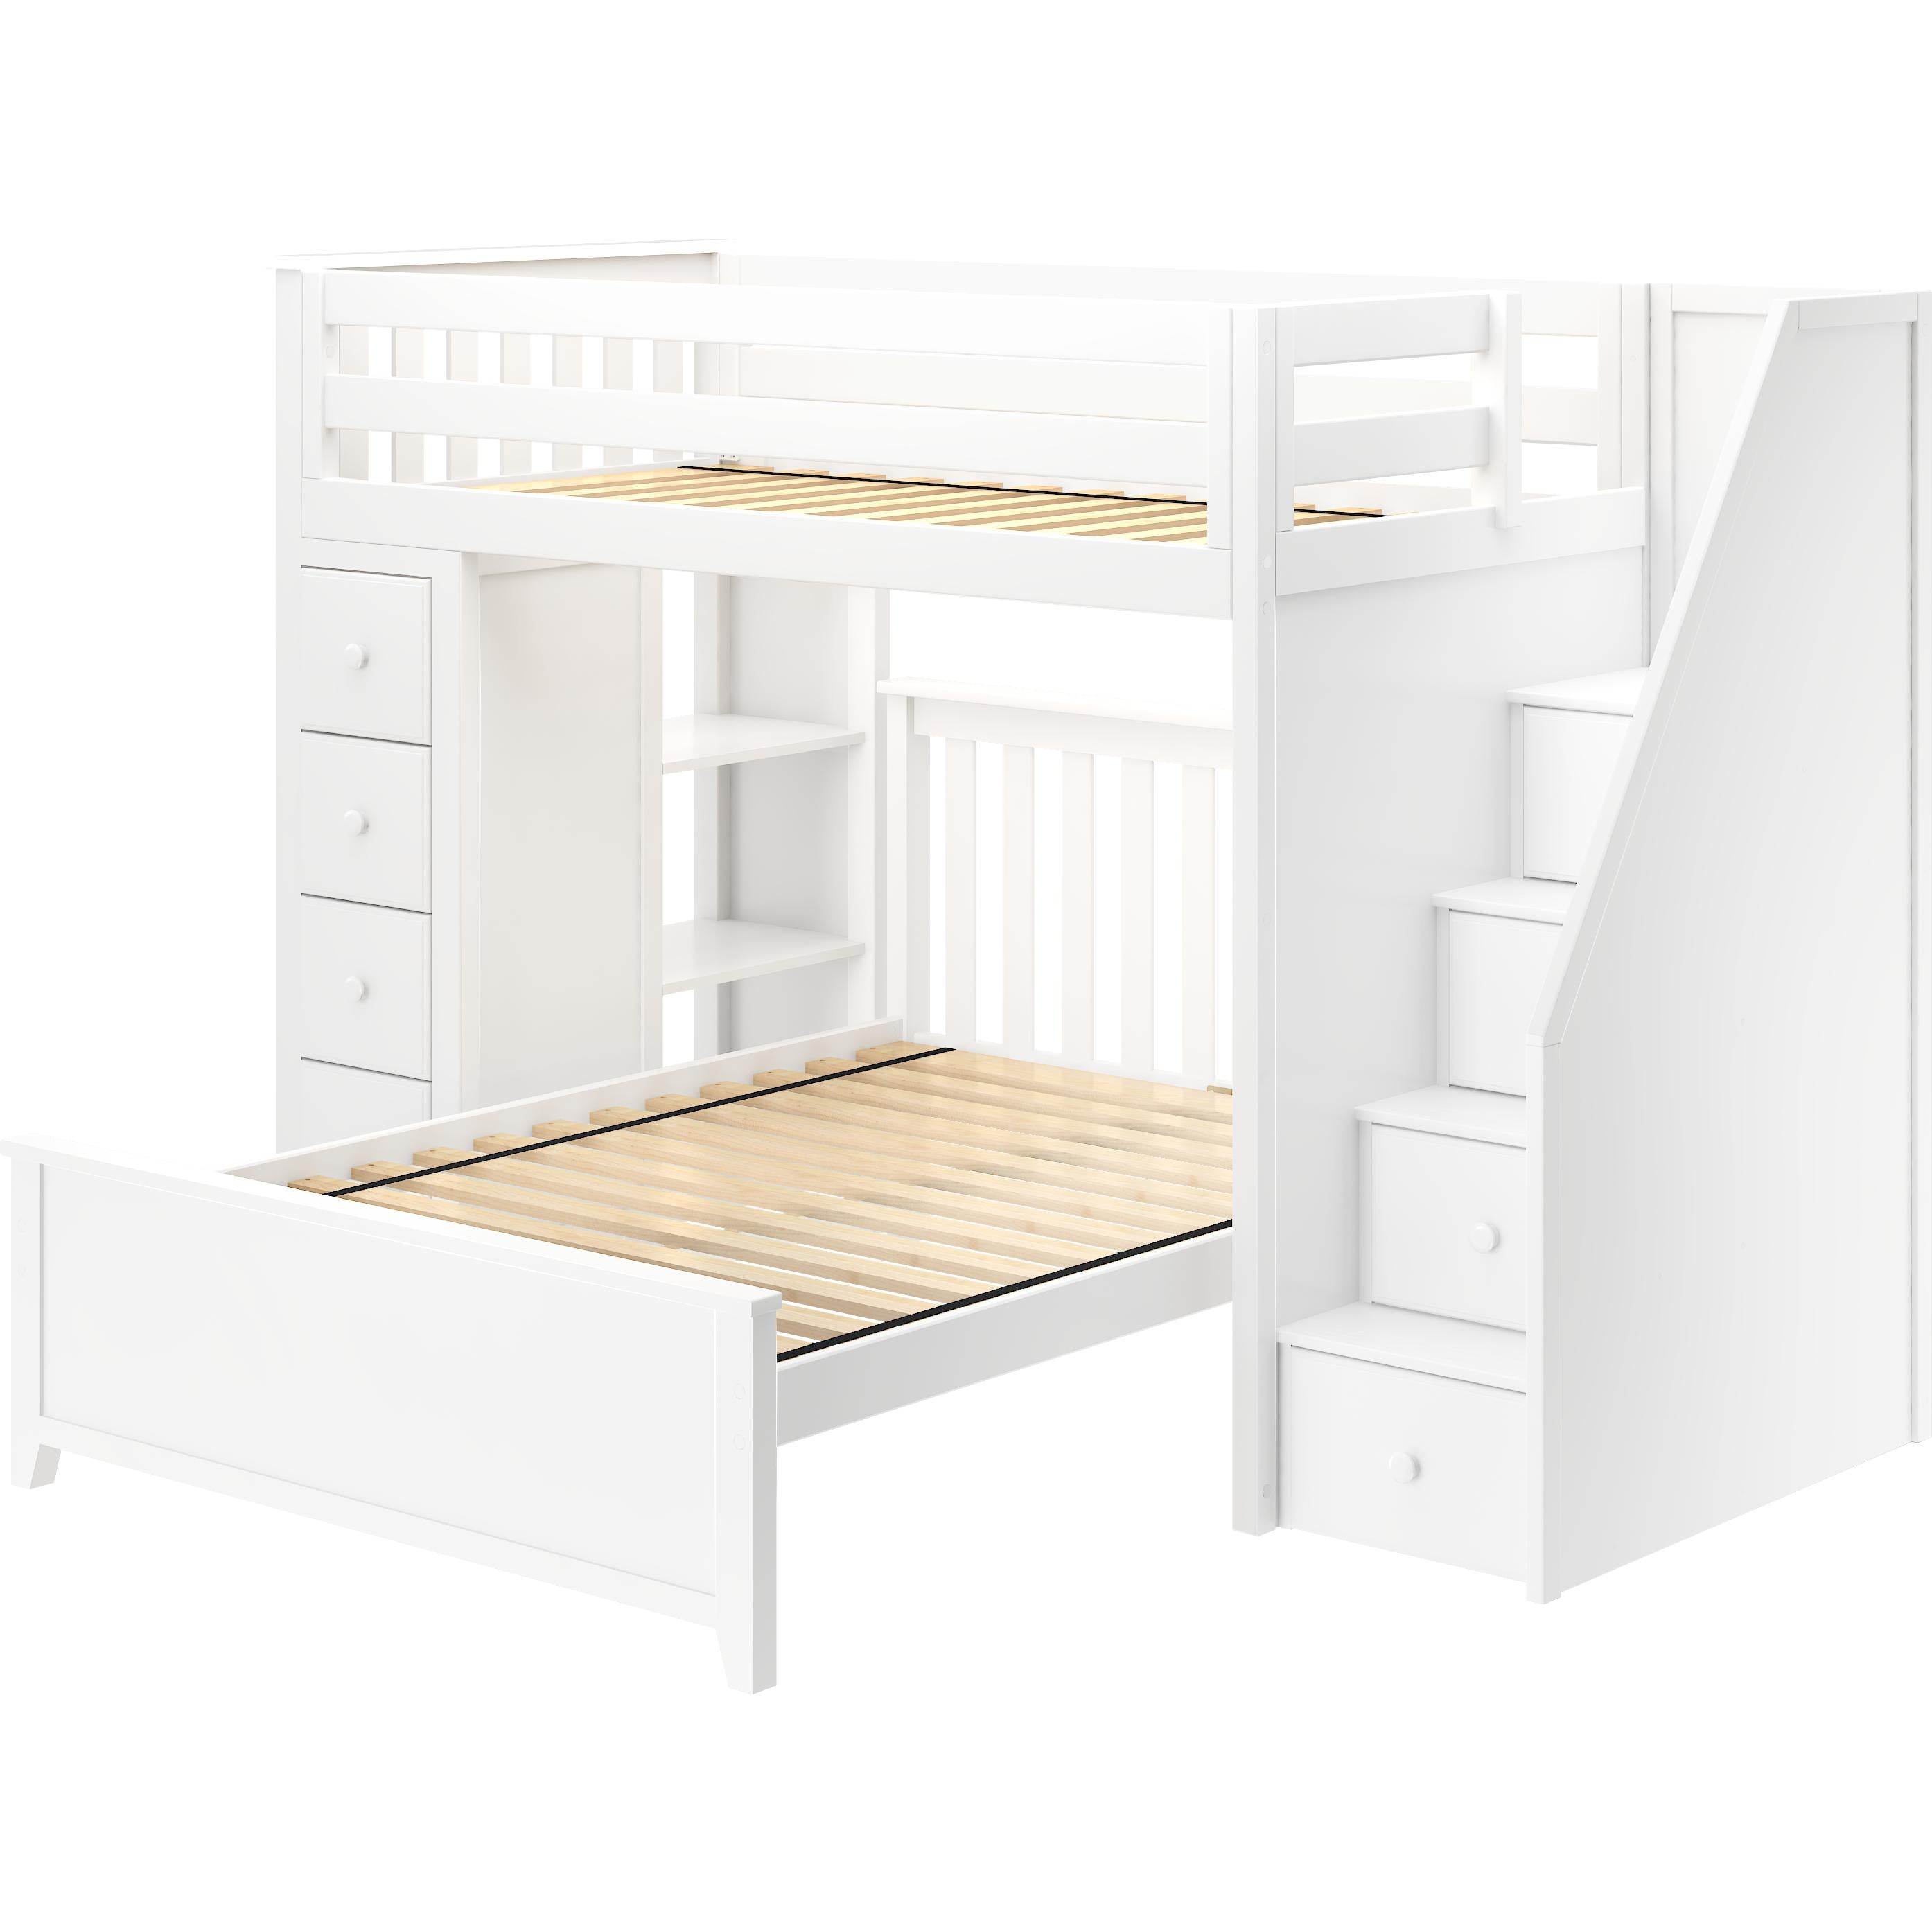 Jackpot Deluxe Staircase Loft Bed Storage + Twin Bed